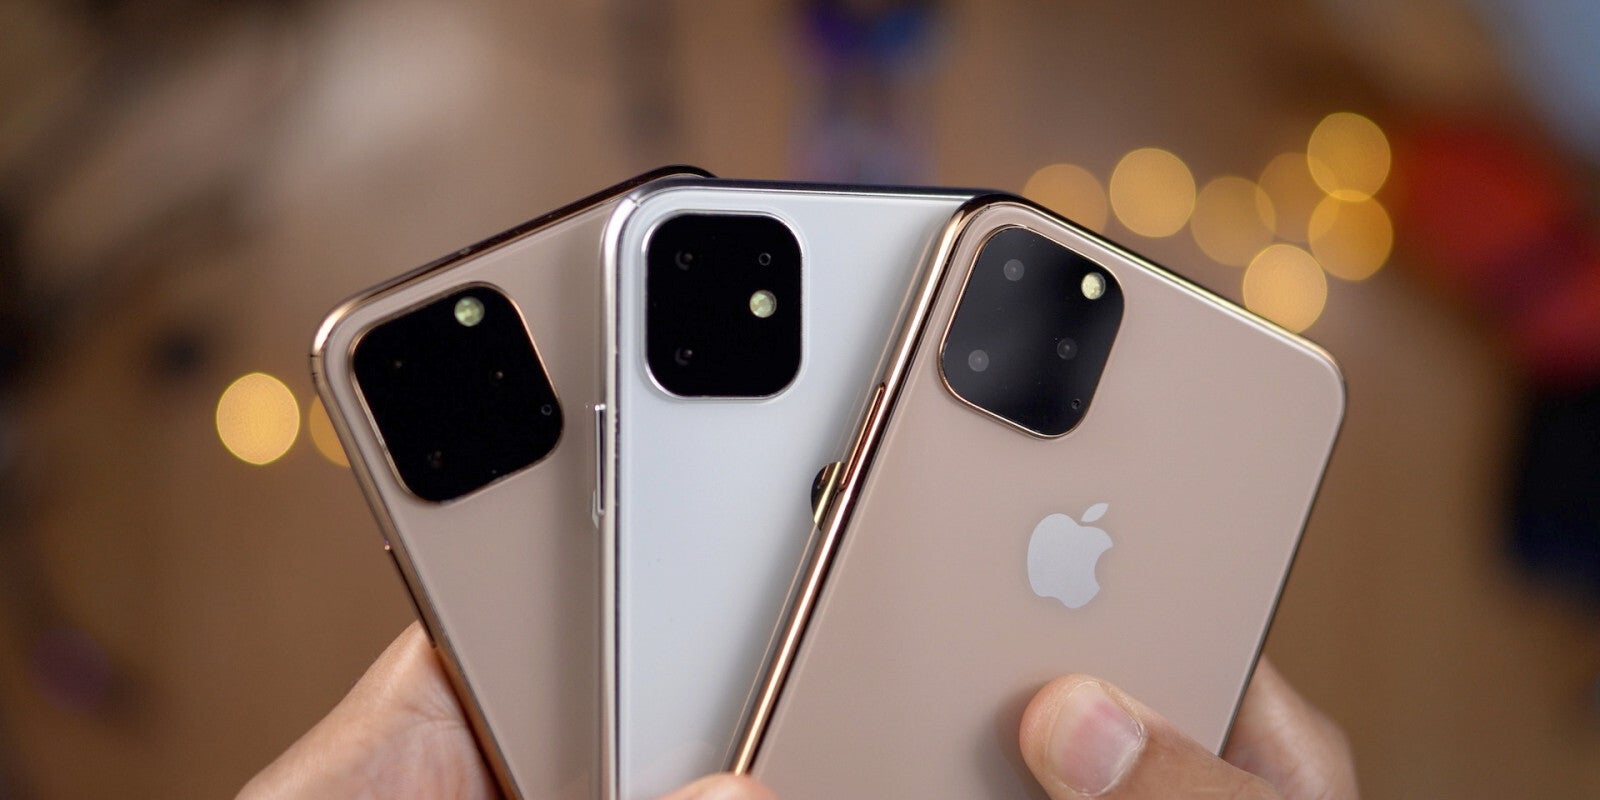 The upcoming 2019 Apple iPhones are expected to feature a square camera module on the back - A key component for the 2019 iPhone 11 Pro models is now reportedly being produced